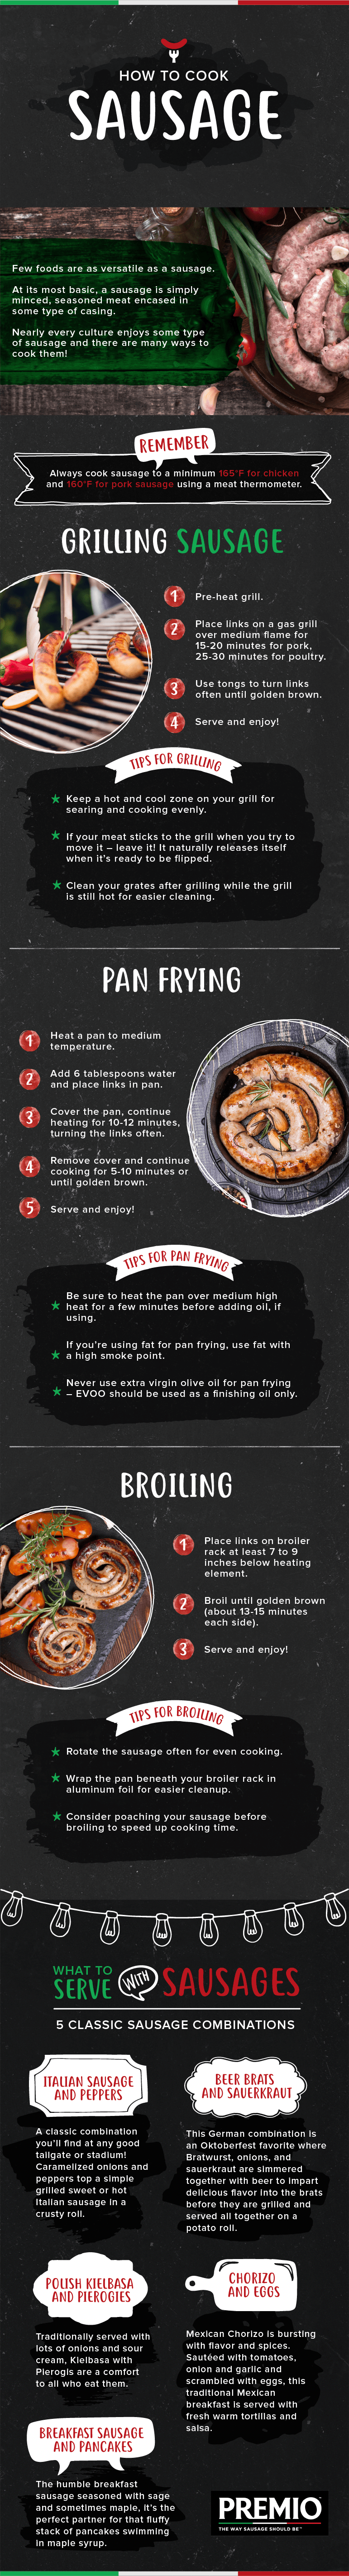 How to Cook Sausage